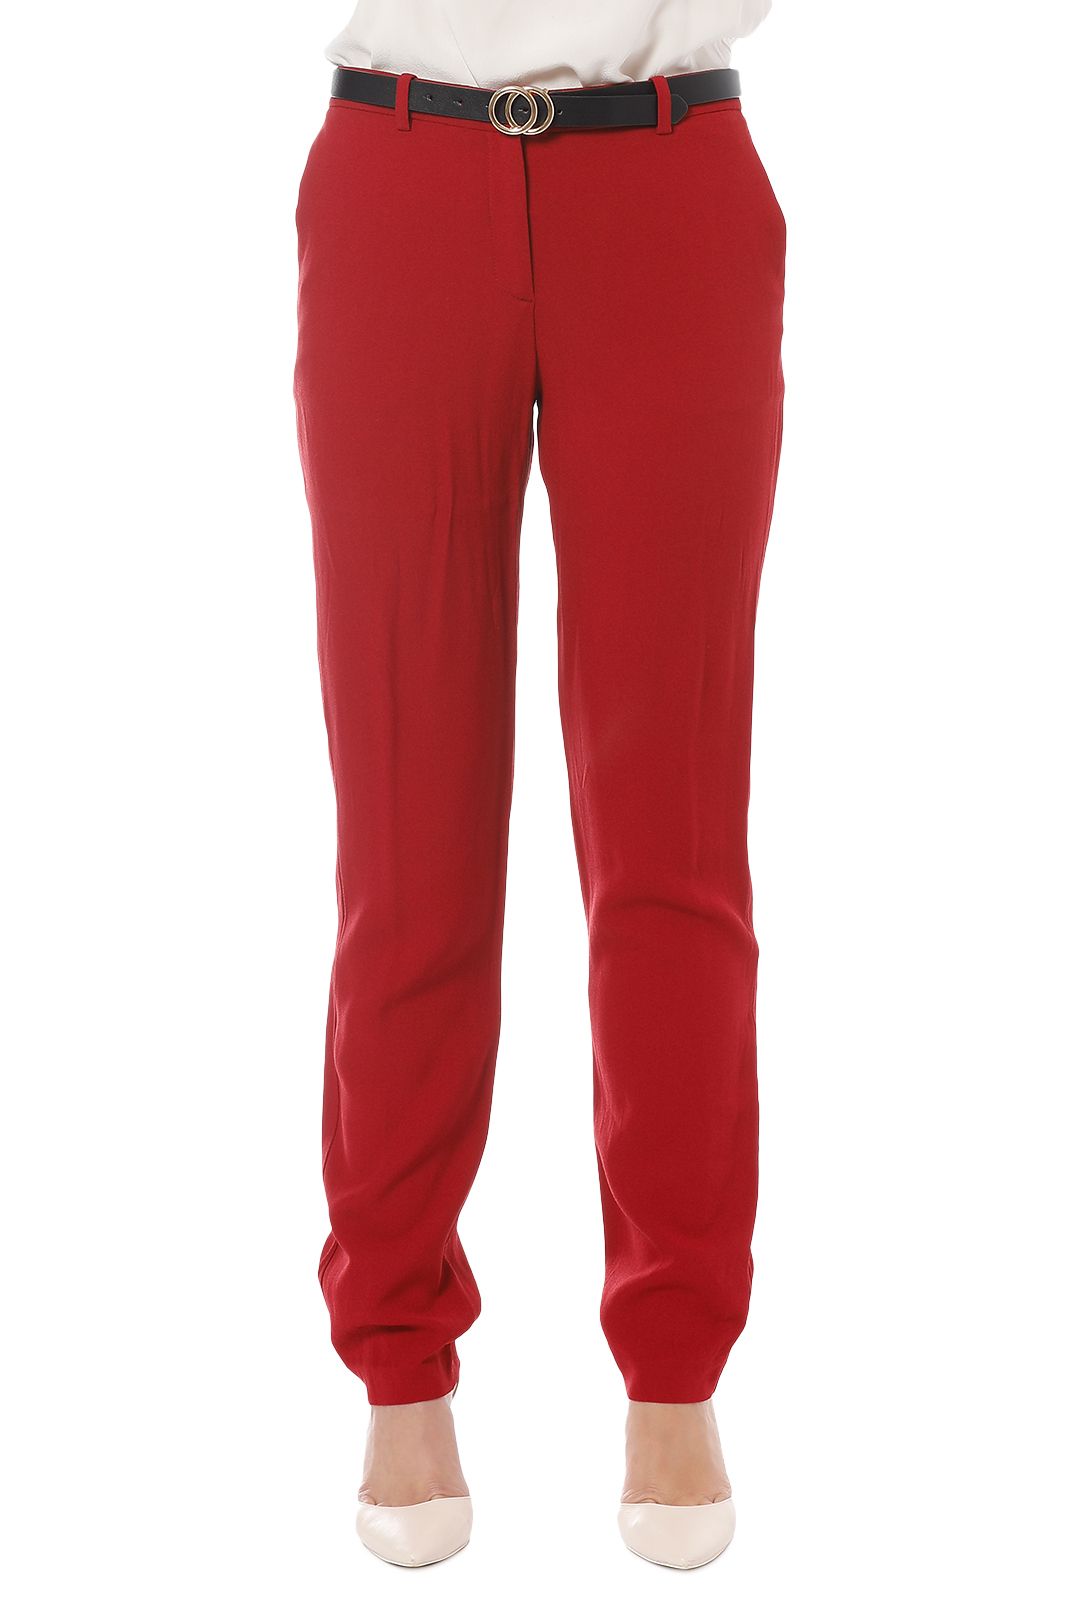 Theory - Crepe Power Pant - Red - Front Crop